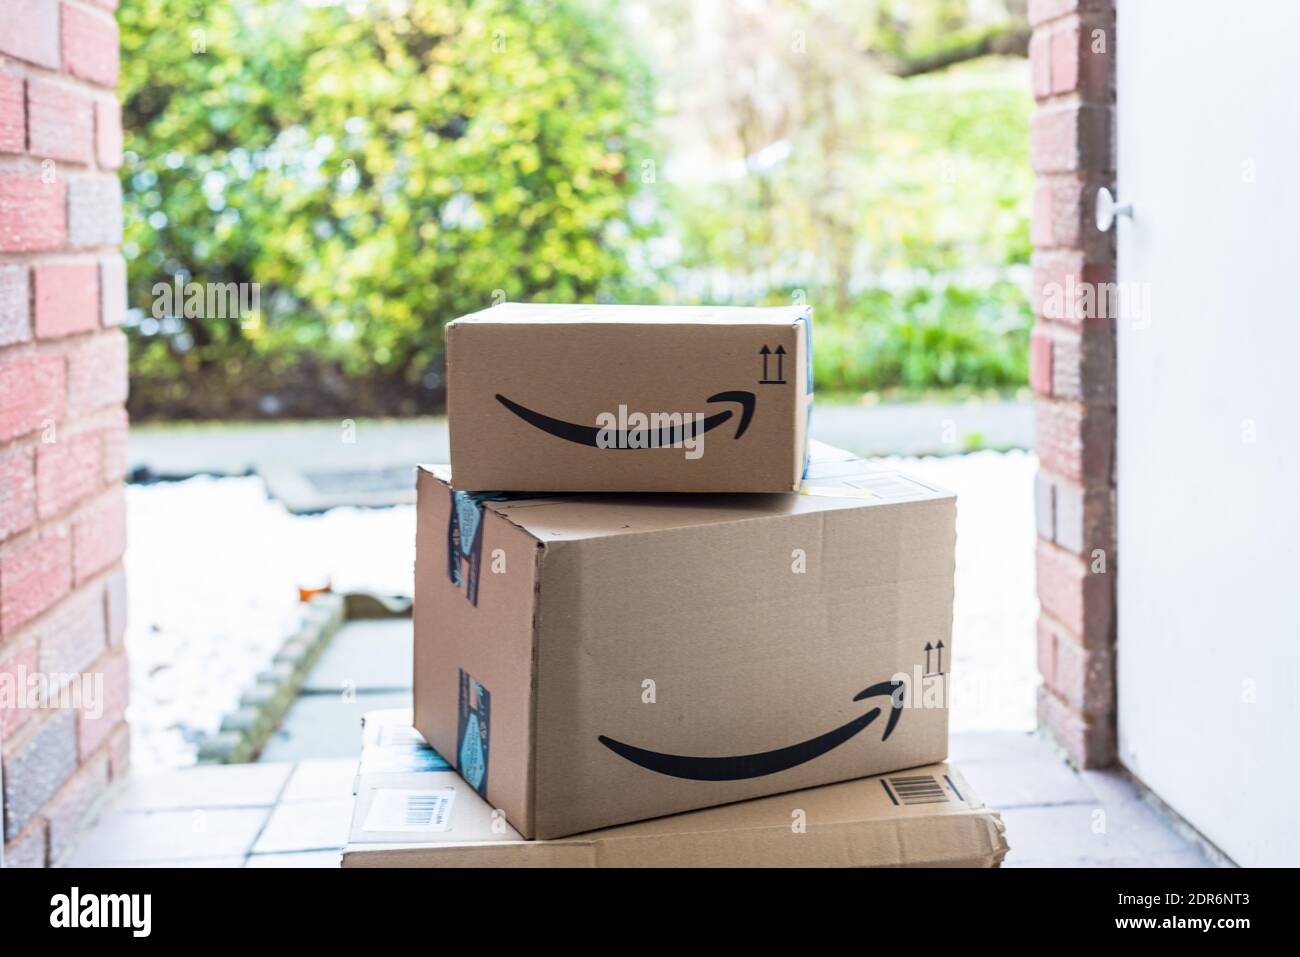 Amazon parcel stacked up cardboard box at door step Stock Photo